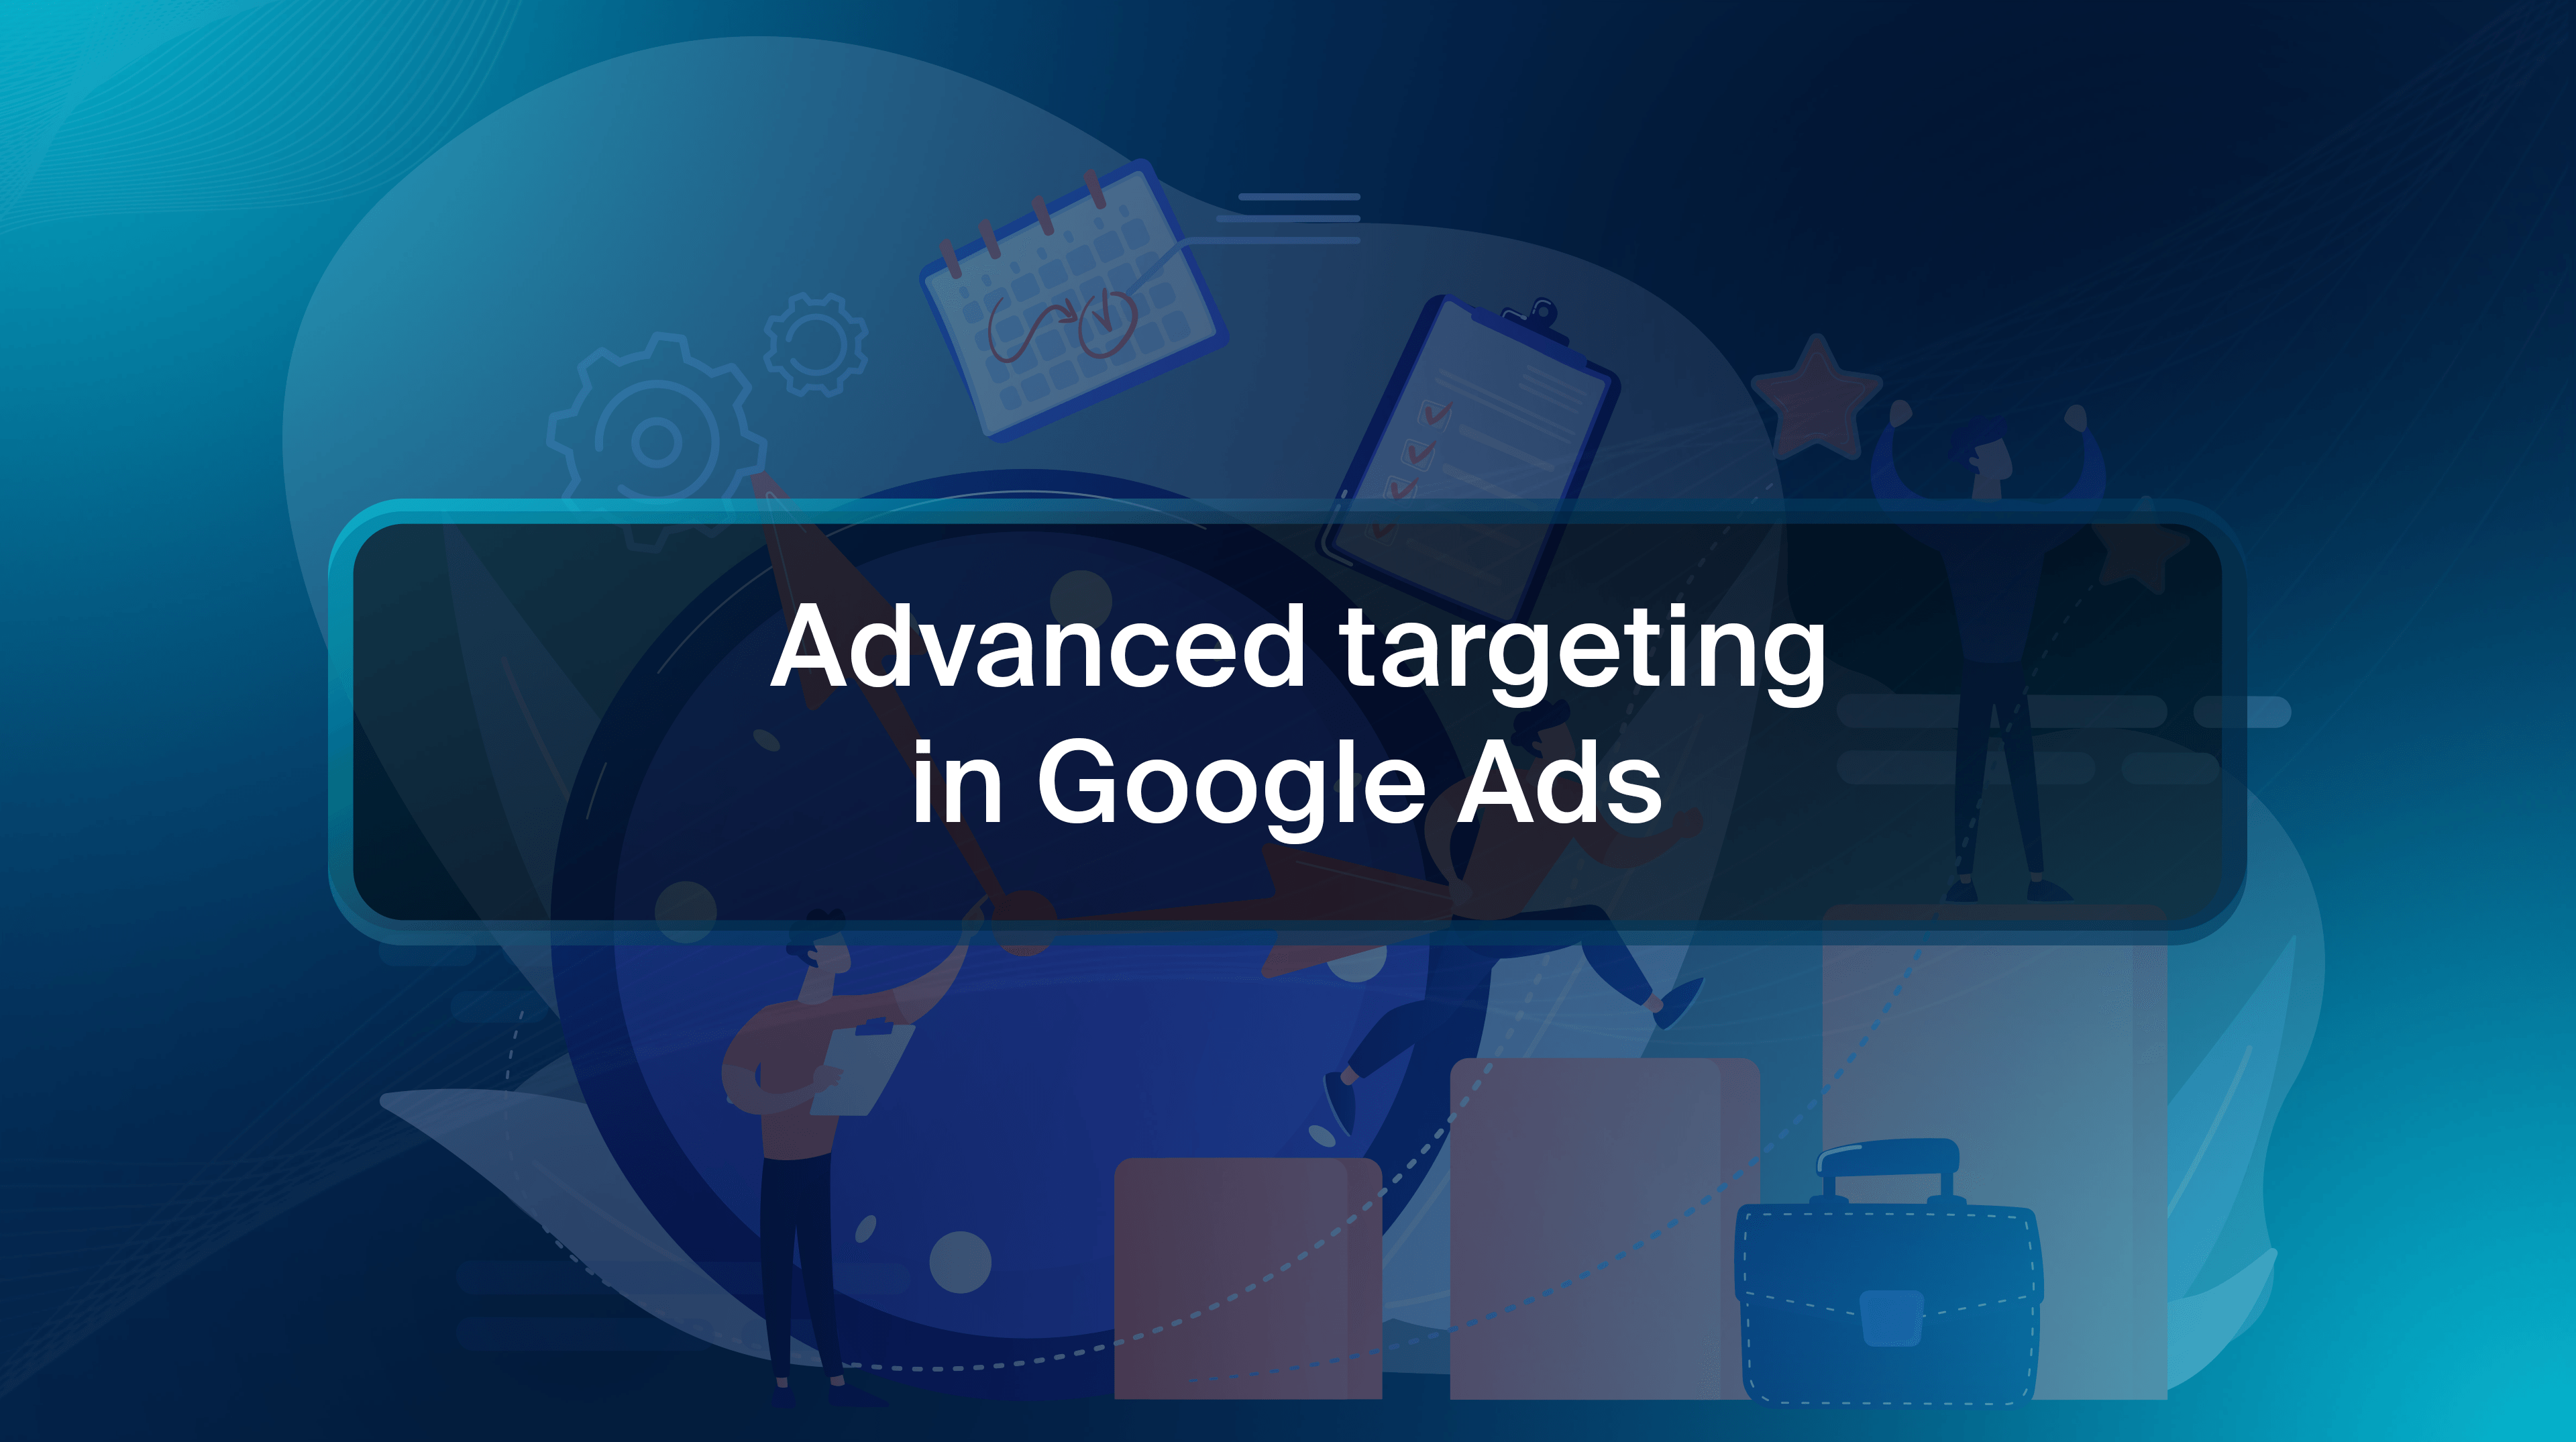 Advanced targeting in Google Ads